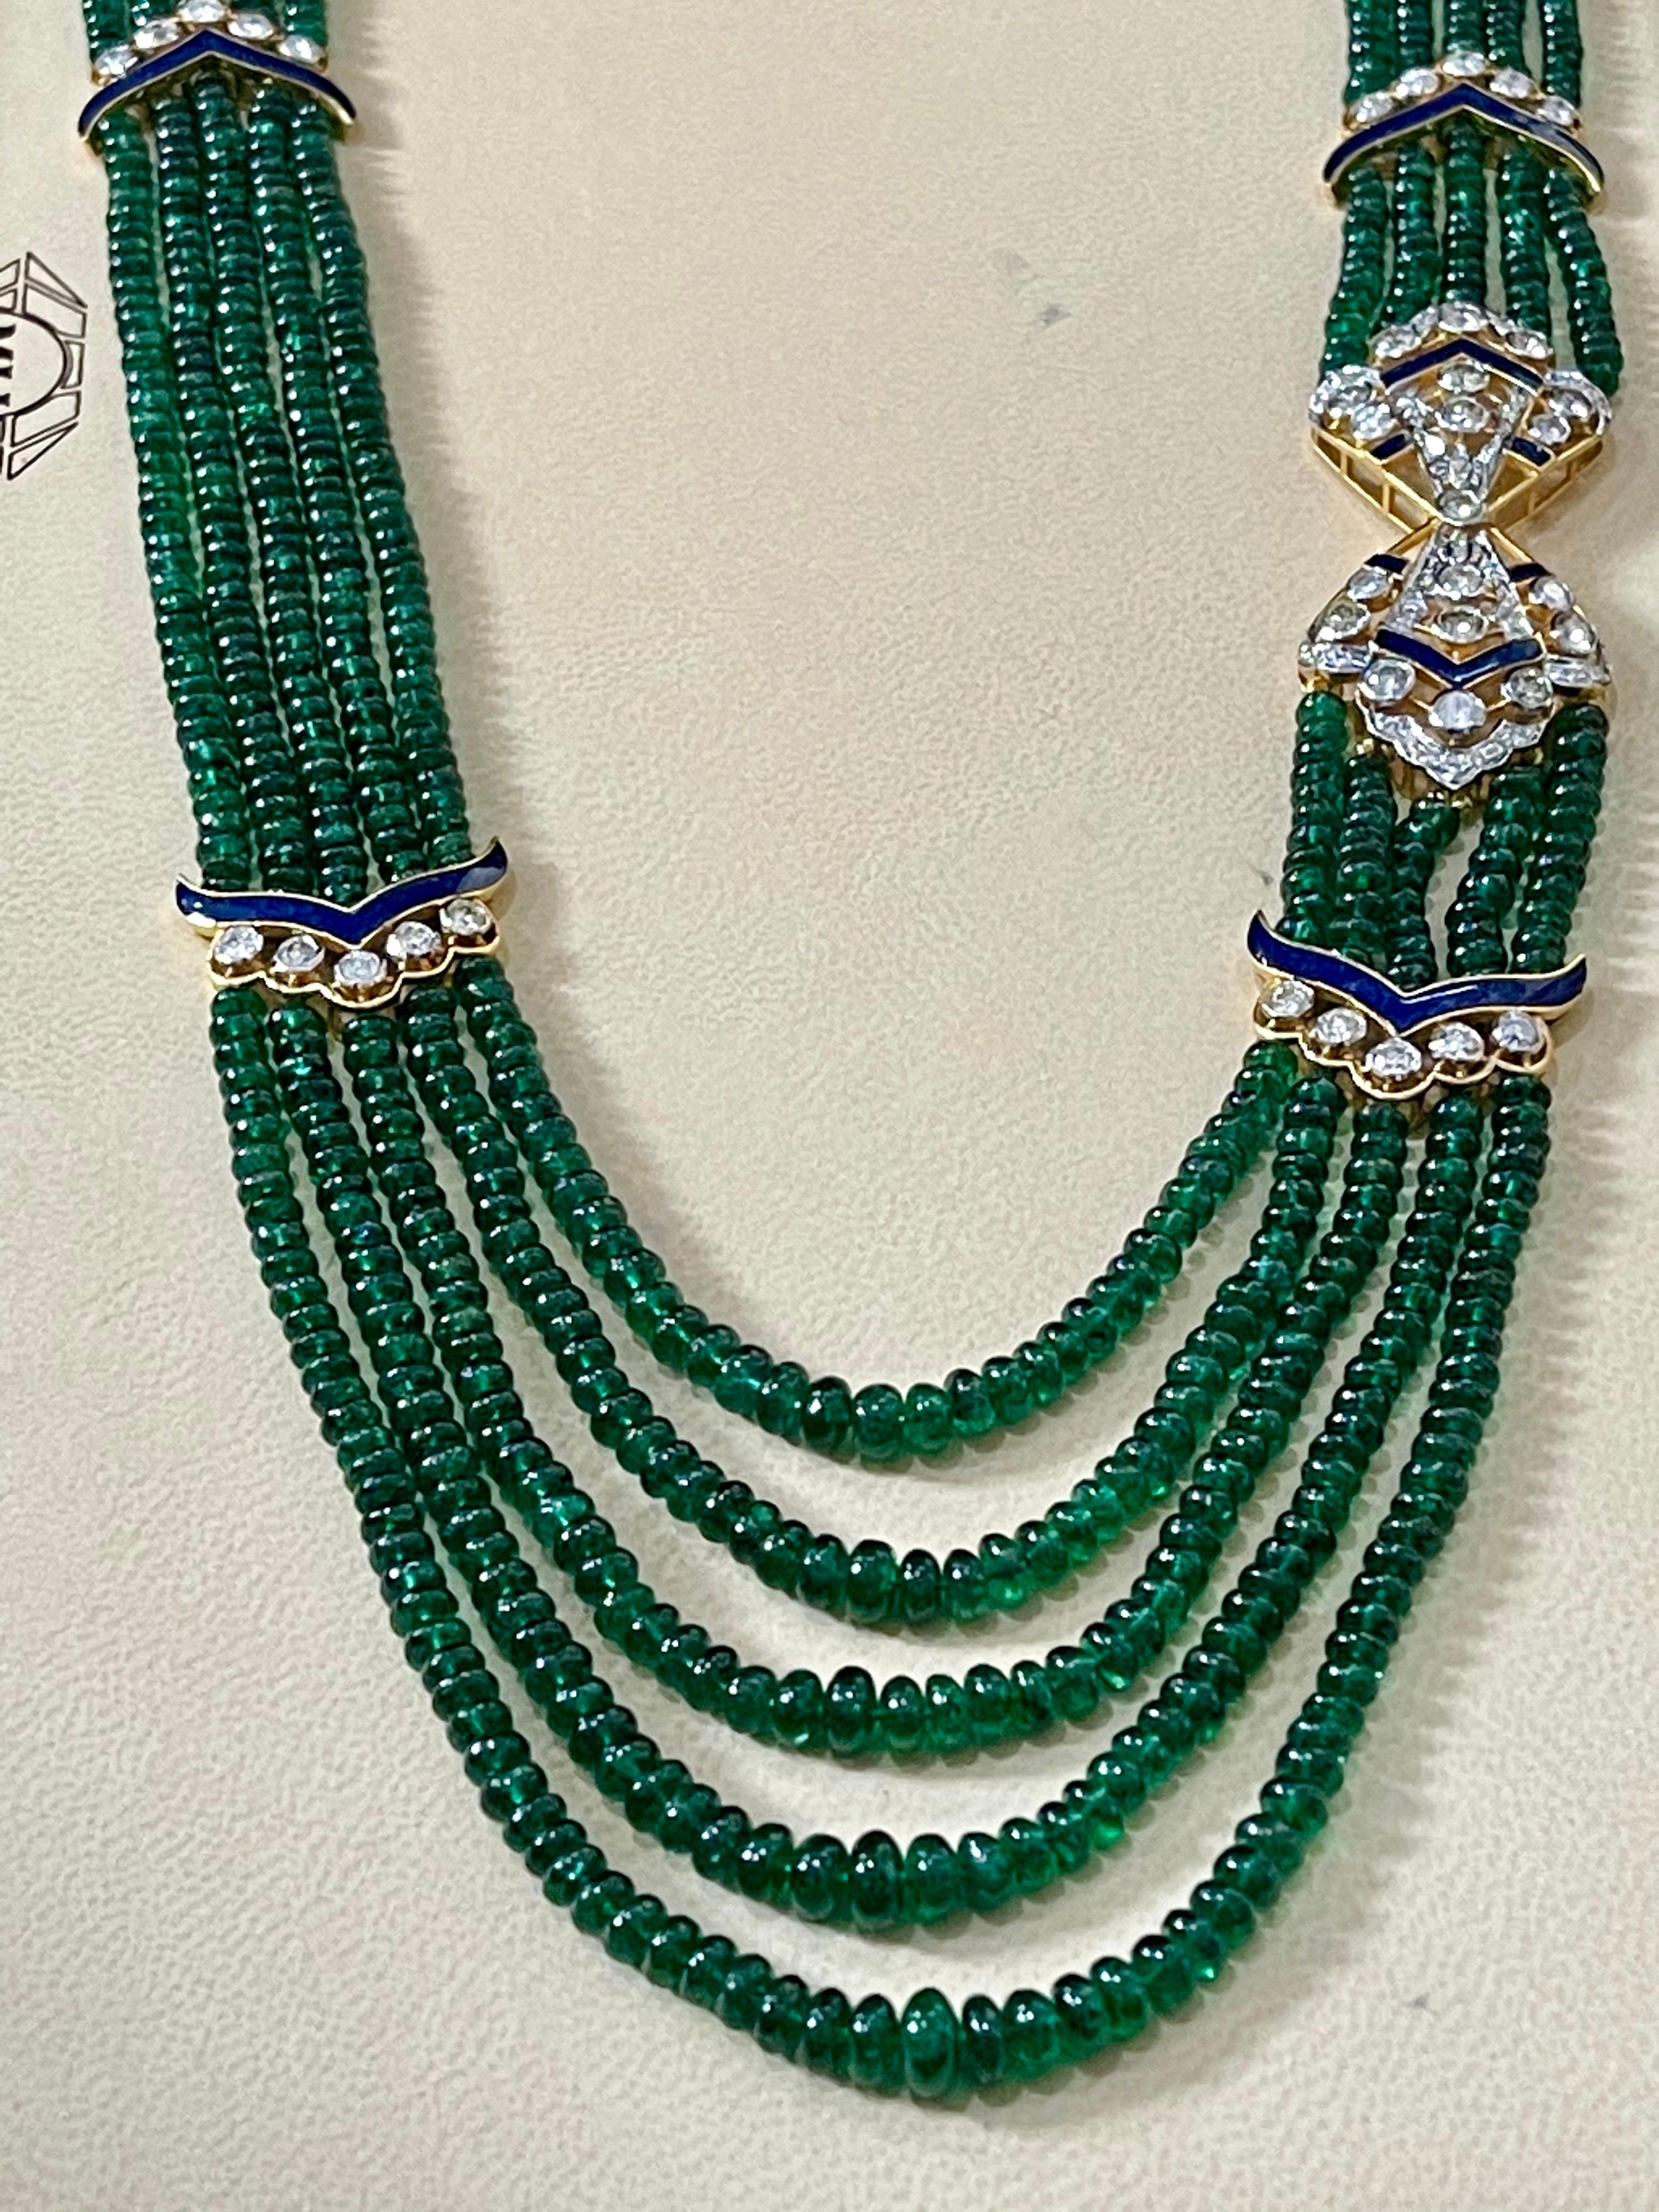 300 Carat 5-Strand Emerald Necklace with 4.8 Carat Diamond & Enamel in 14k Gold For Sale 2